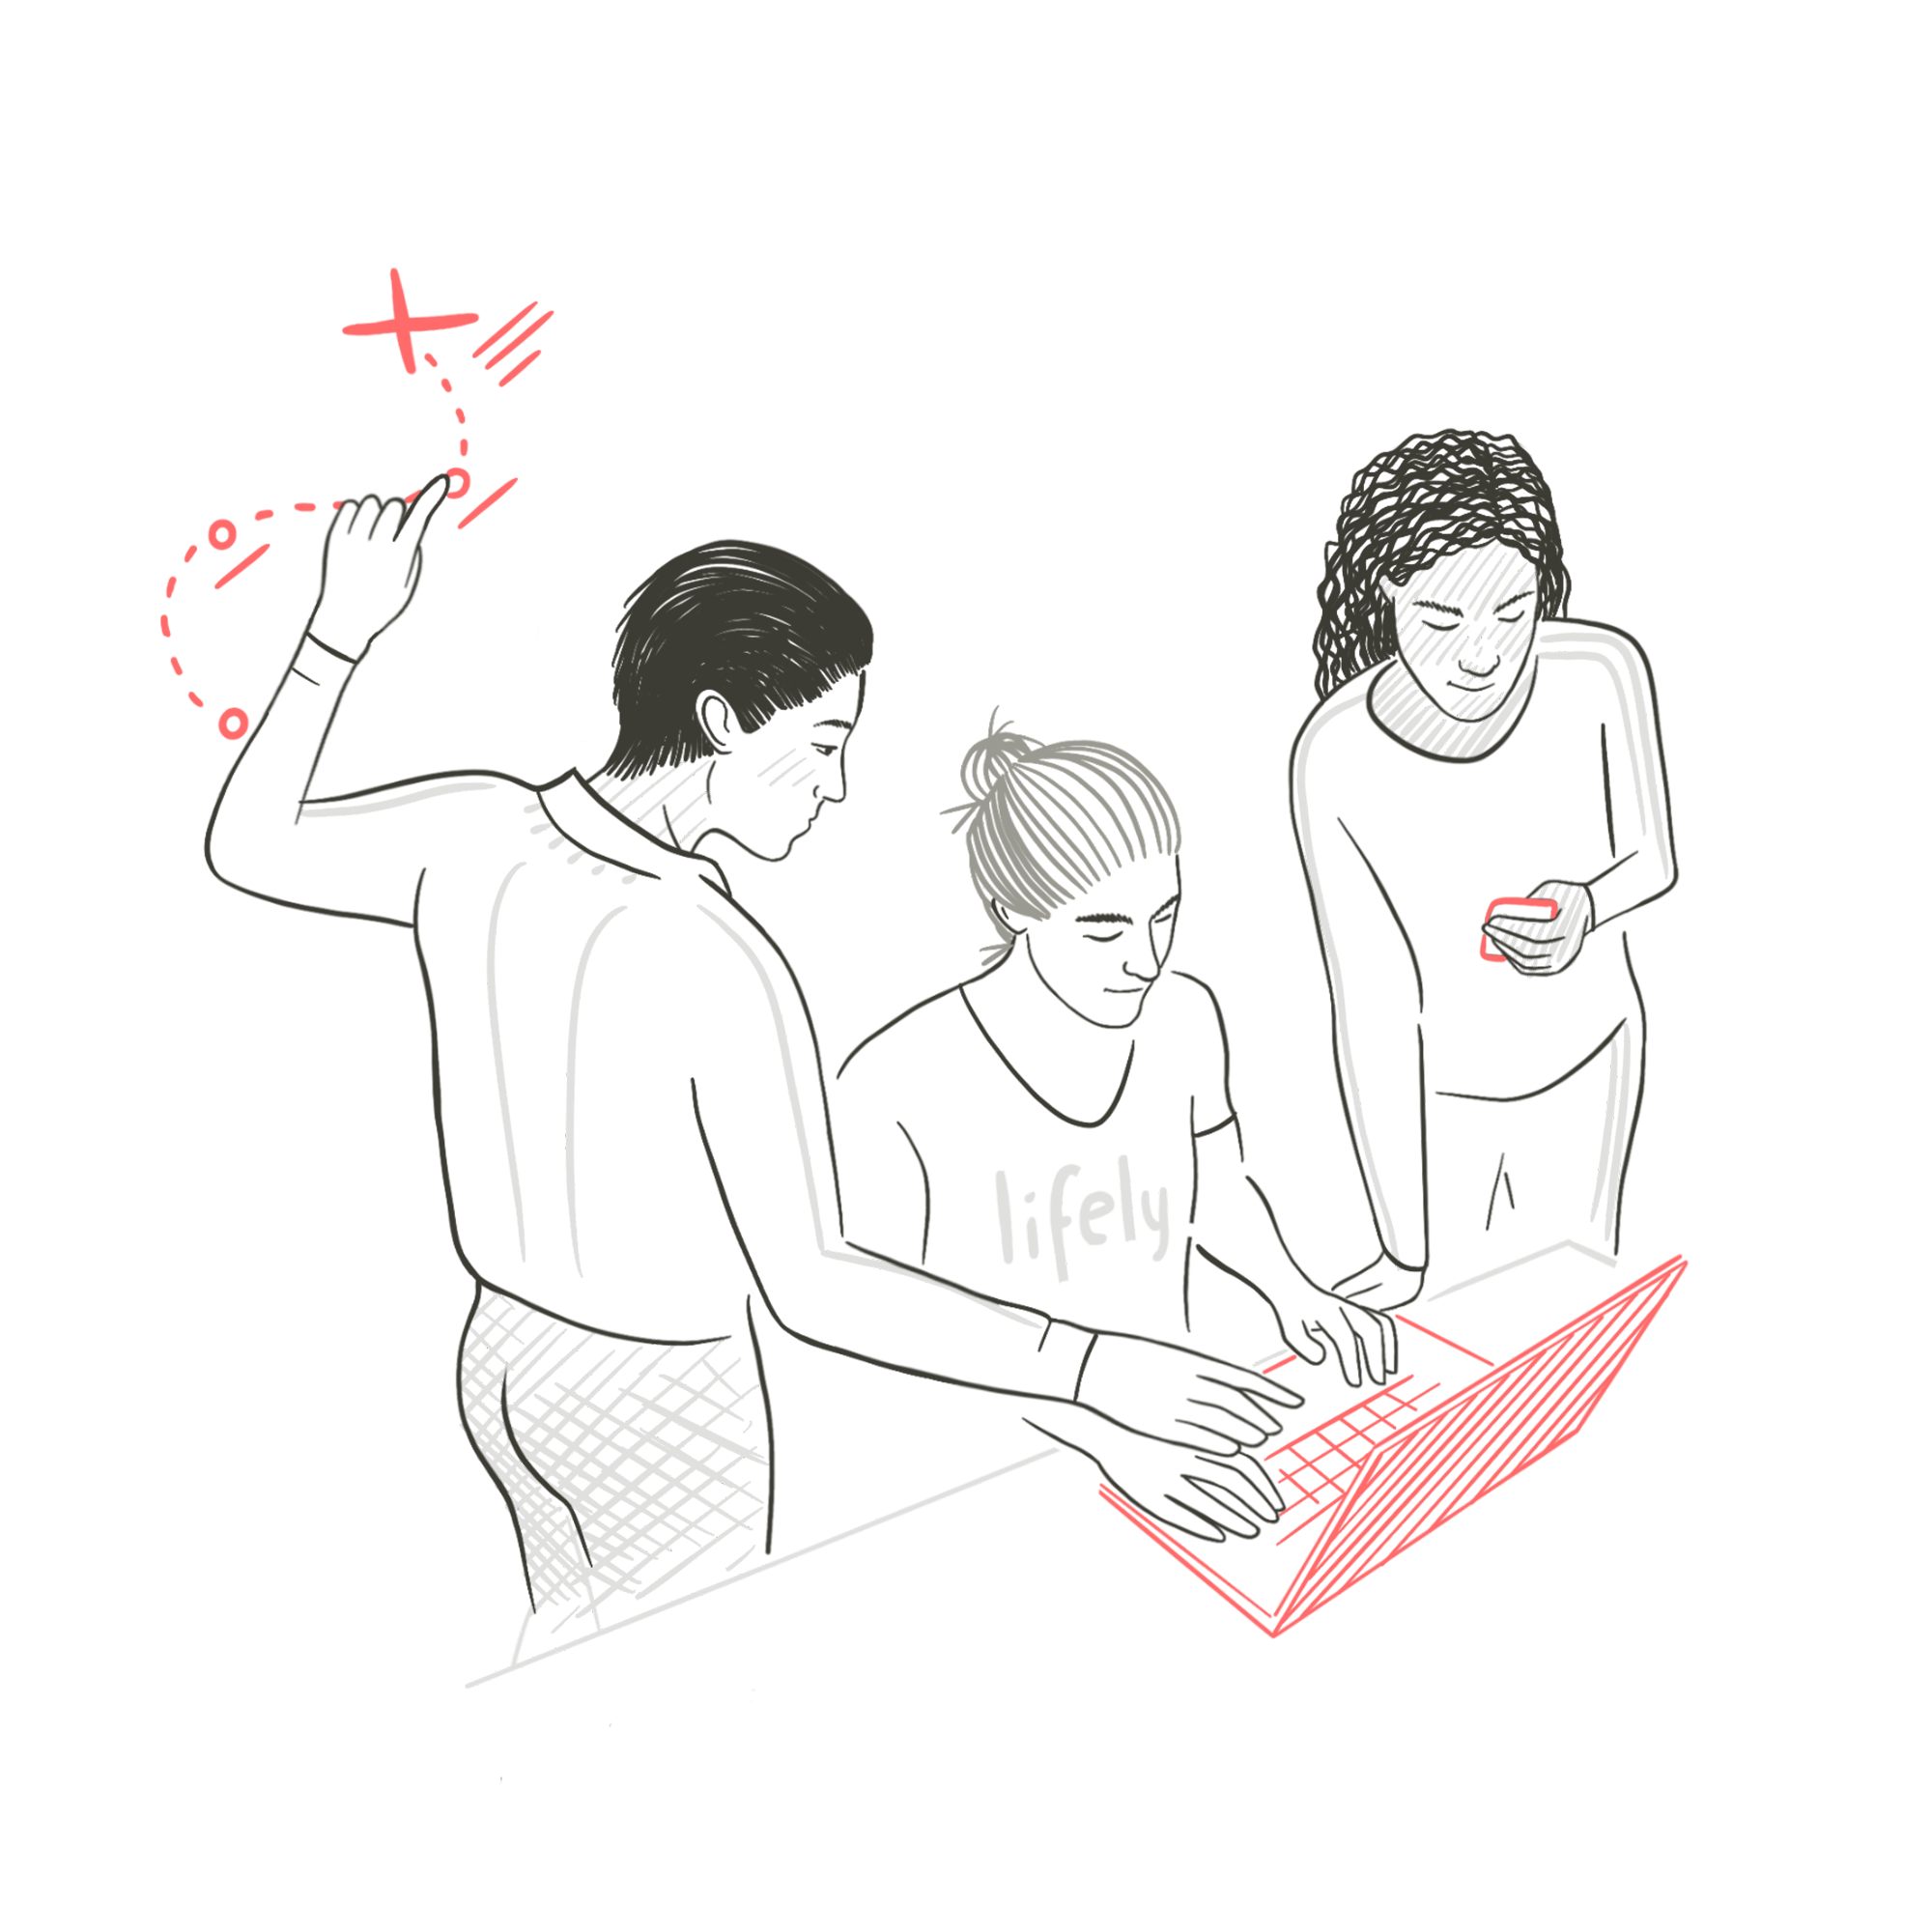 Group of people discussing around a laptop